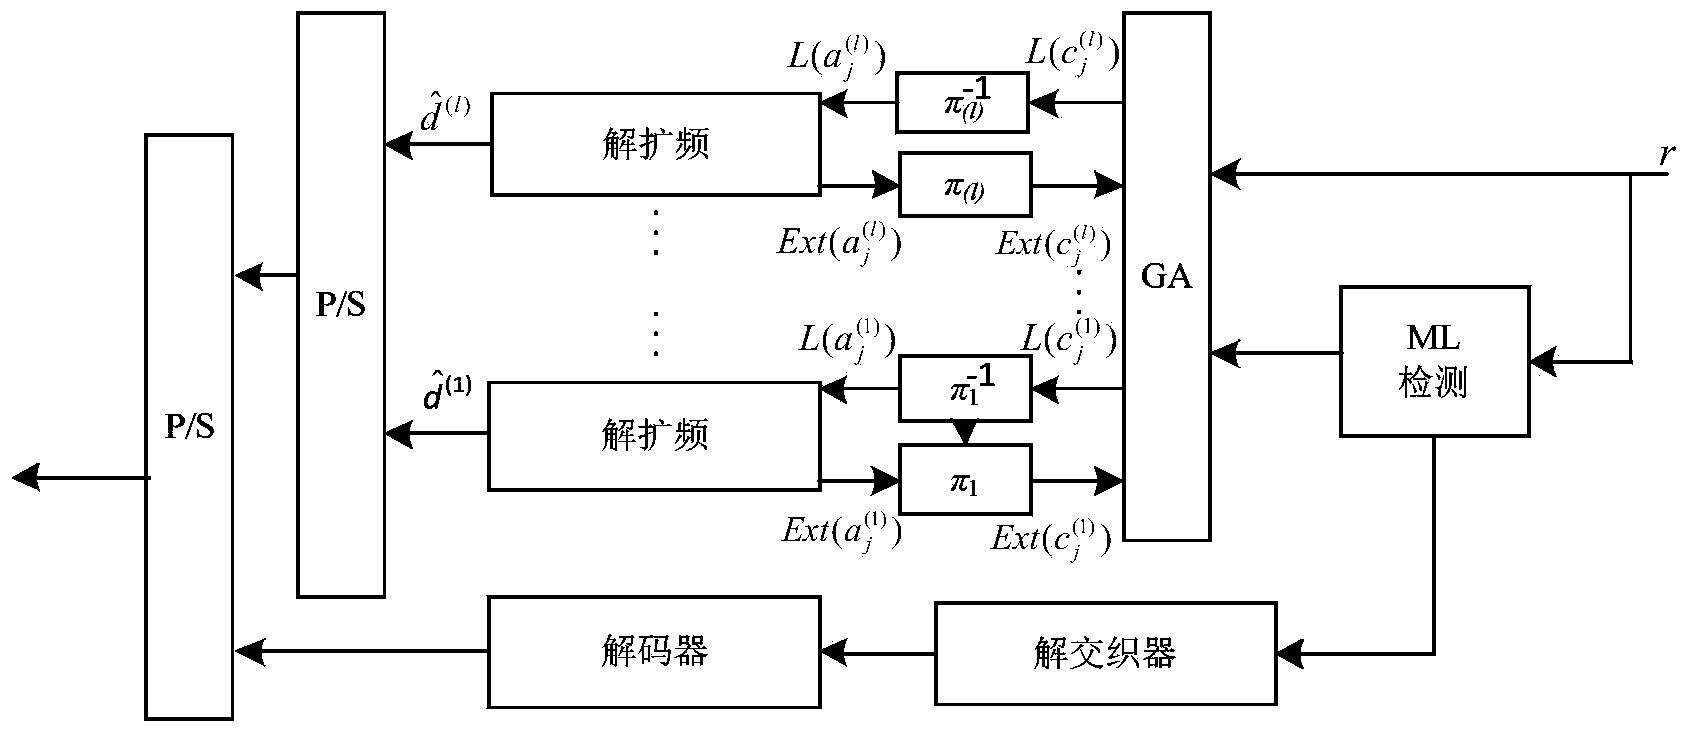 Superposition coded modulation method based on subcarrier index modulation (SIM)-orthogonal frequency division multiplexing (OFDM)